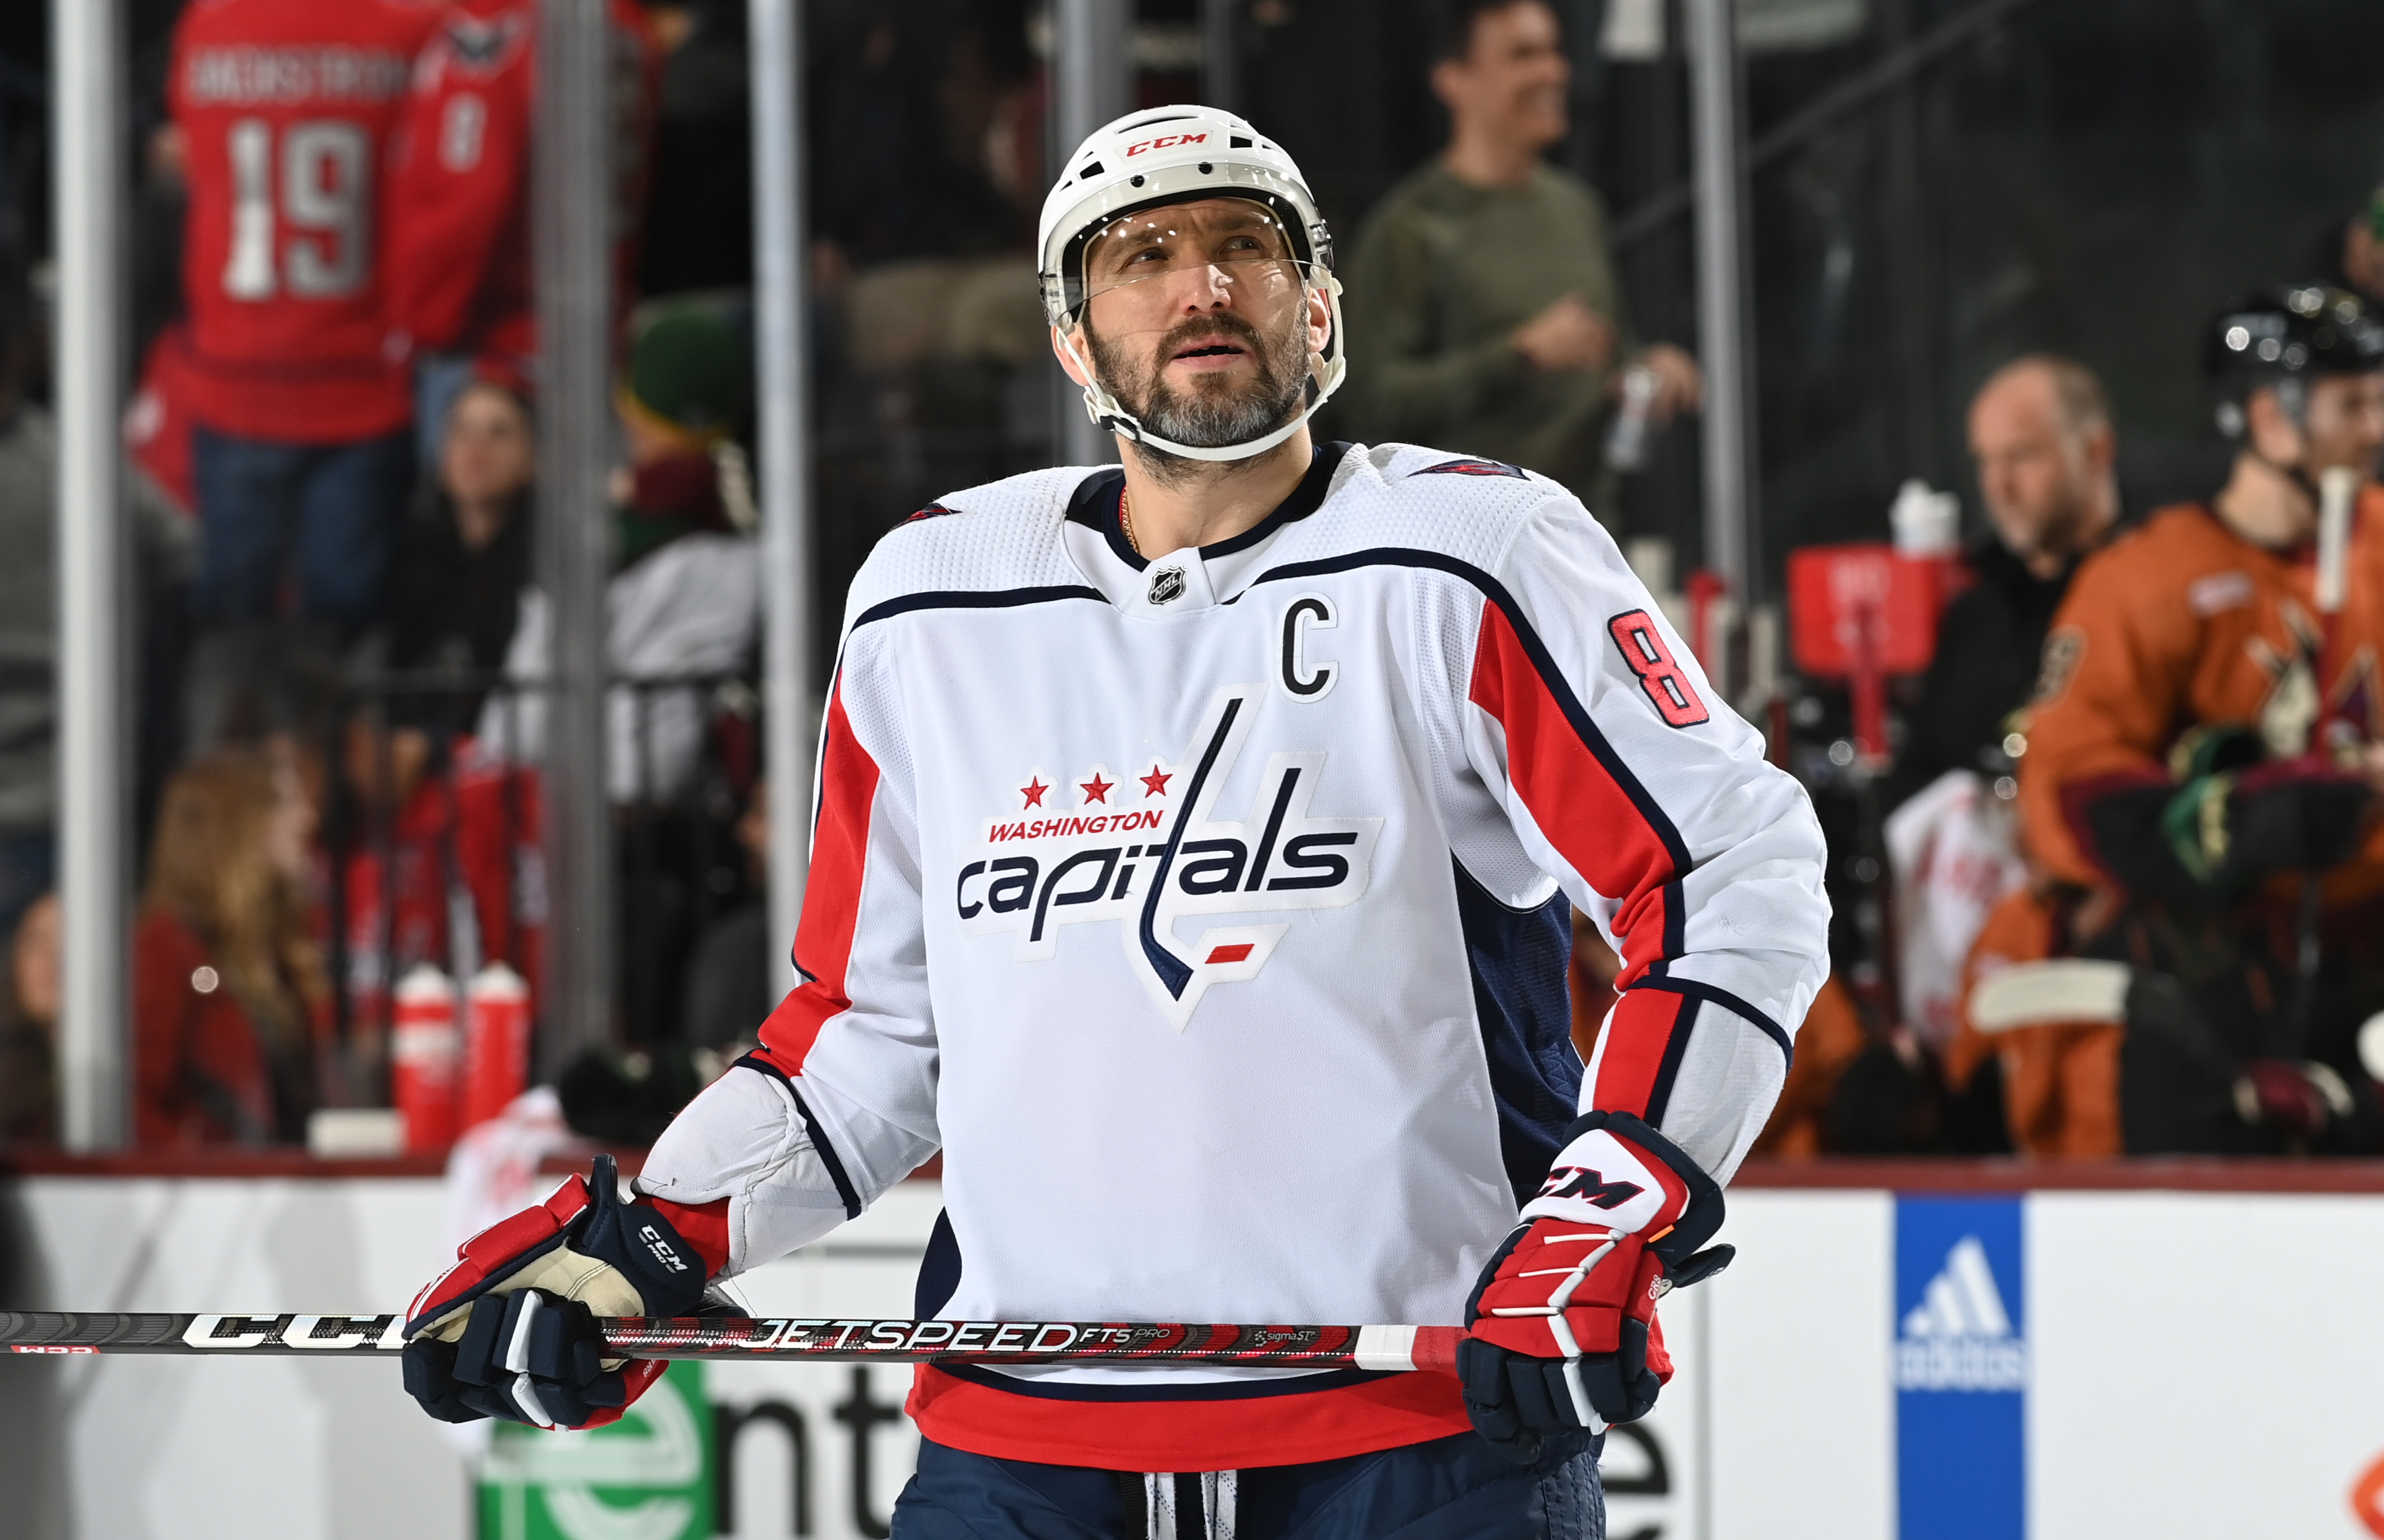 Alex Ovechkin of the Washington Capitals looks up at the scoreboard during a stop in play against the Arizona Coyotes at Mullett Arena on January 19, 2023 in Tempe, Arizona.